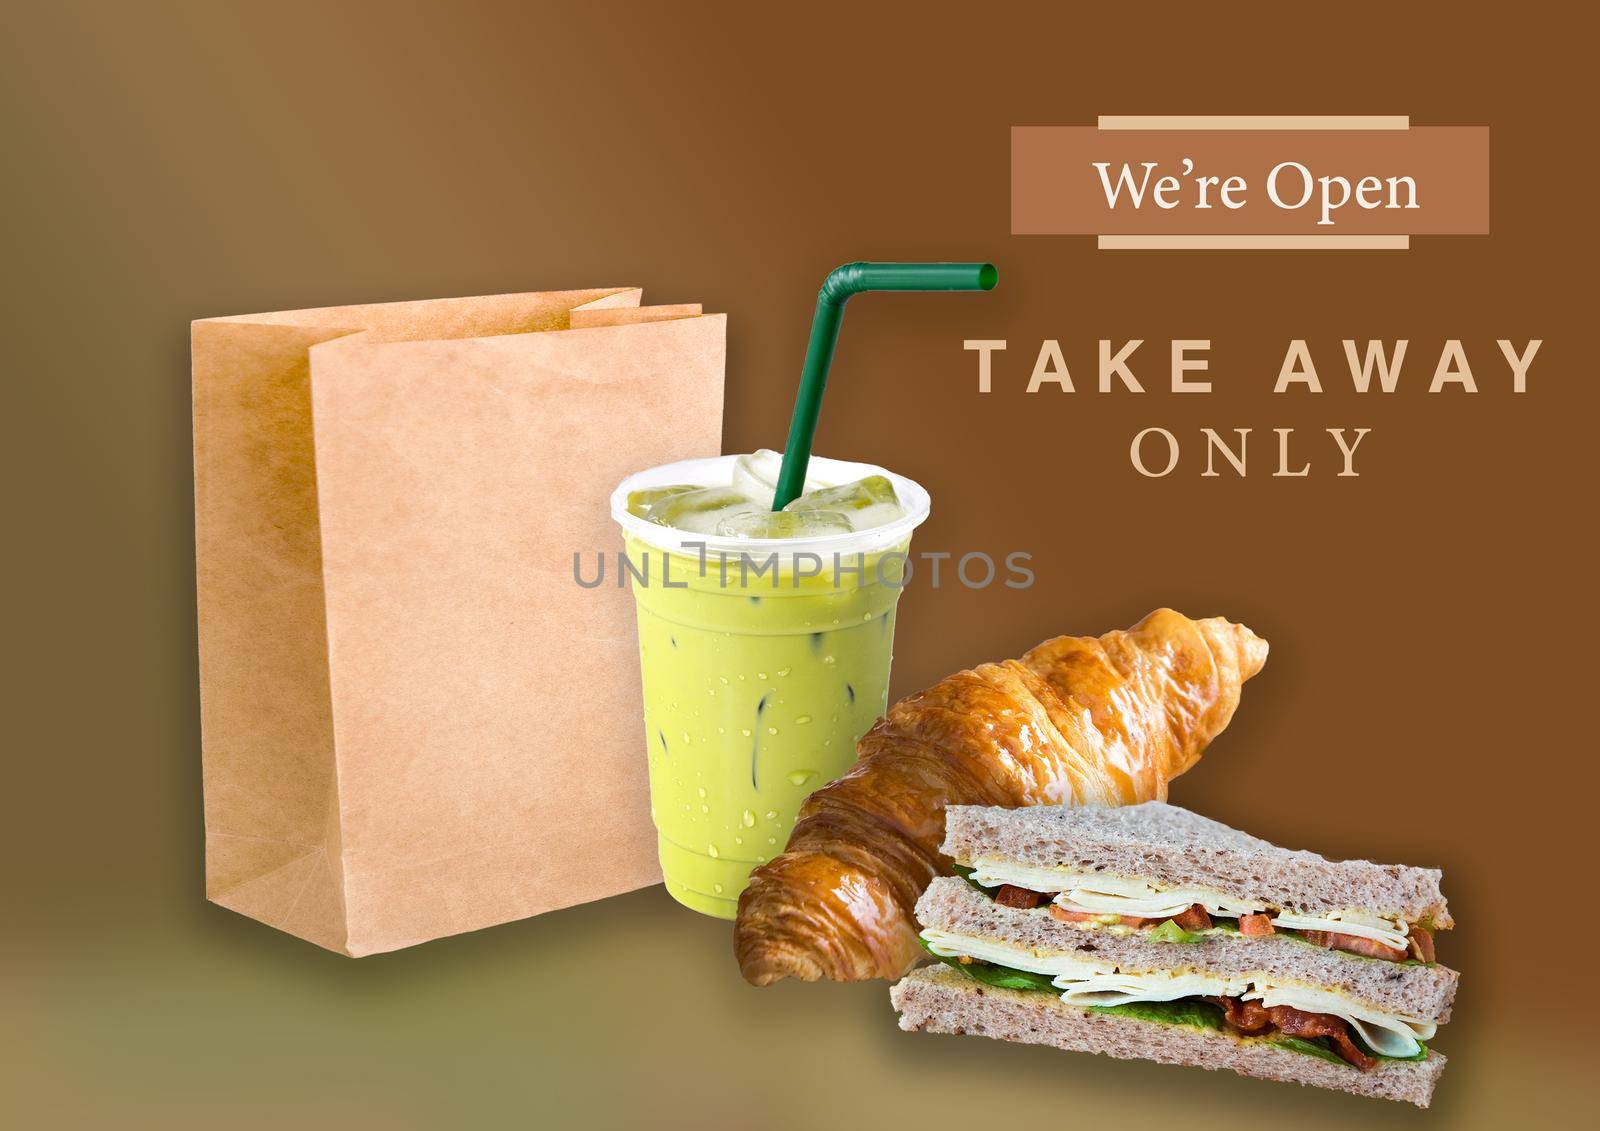 Pastries and drinks for take away only message background for restaurant announcement